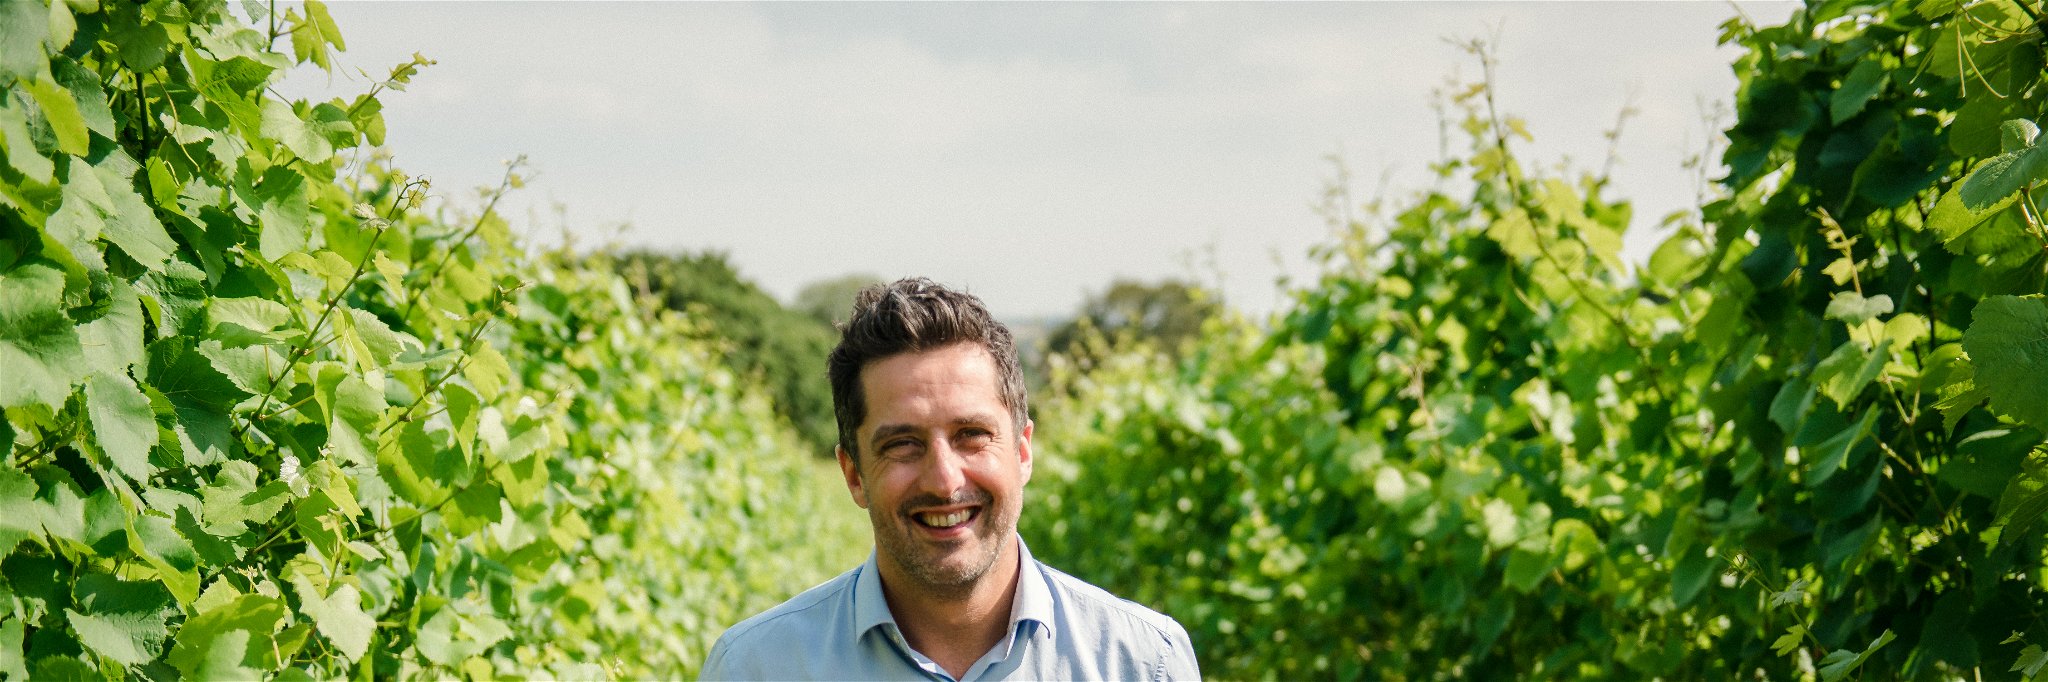 Dry Extract Interview: Charlie Holland of Gusborne Estate, Kent, England